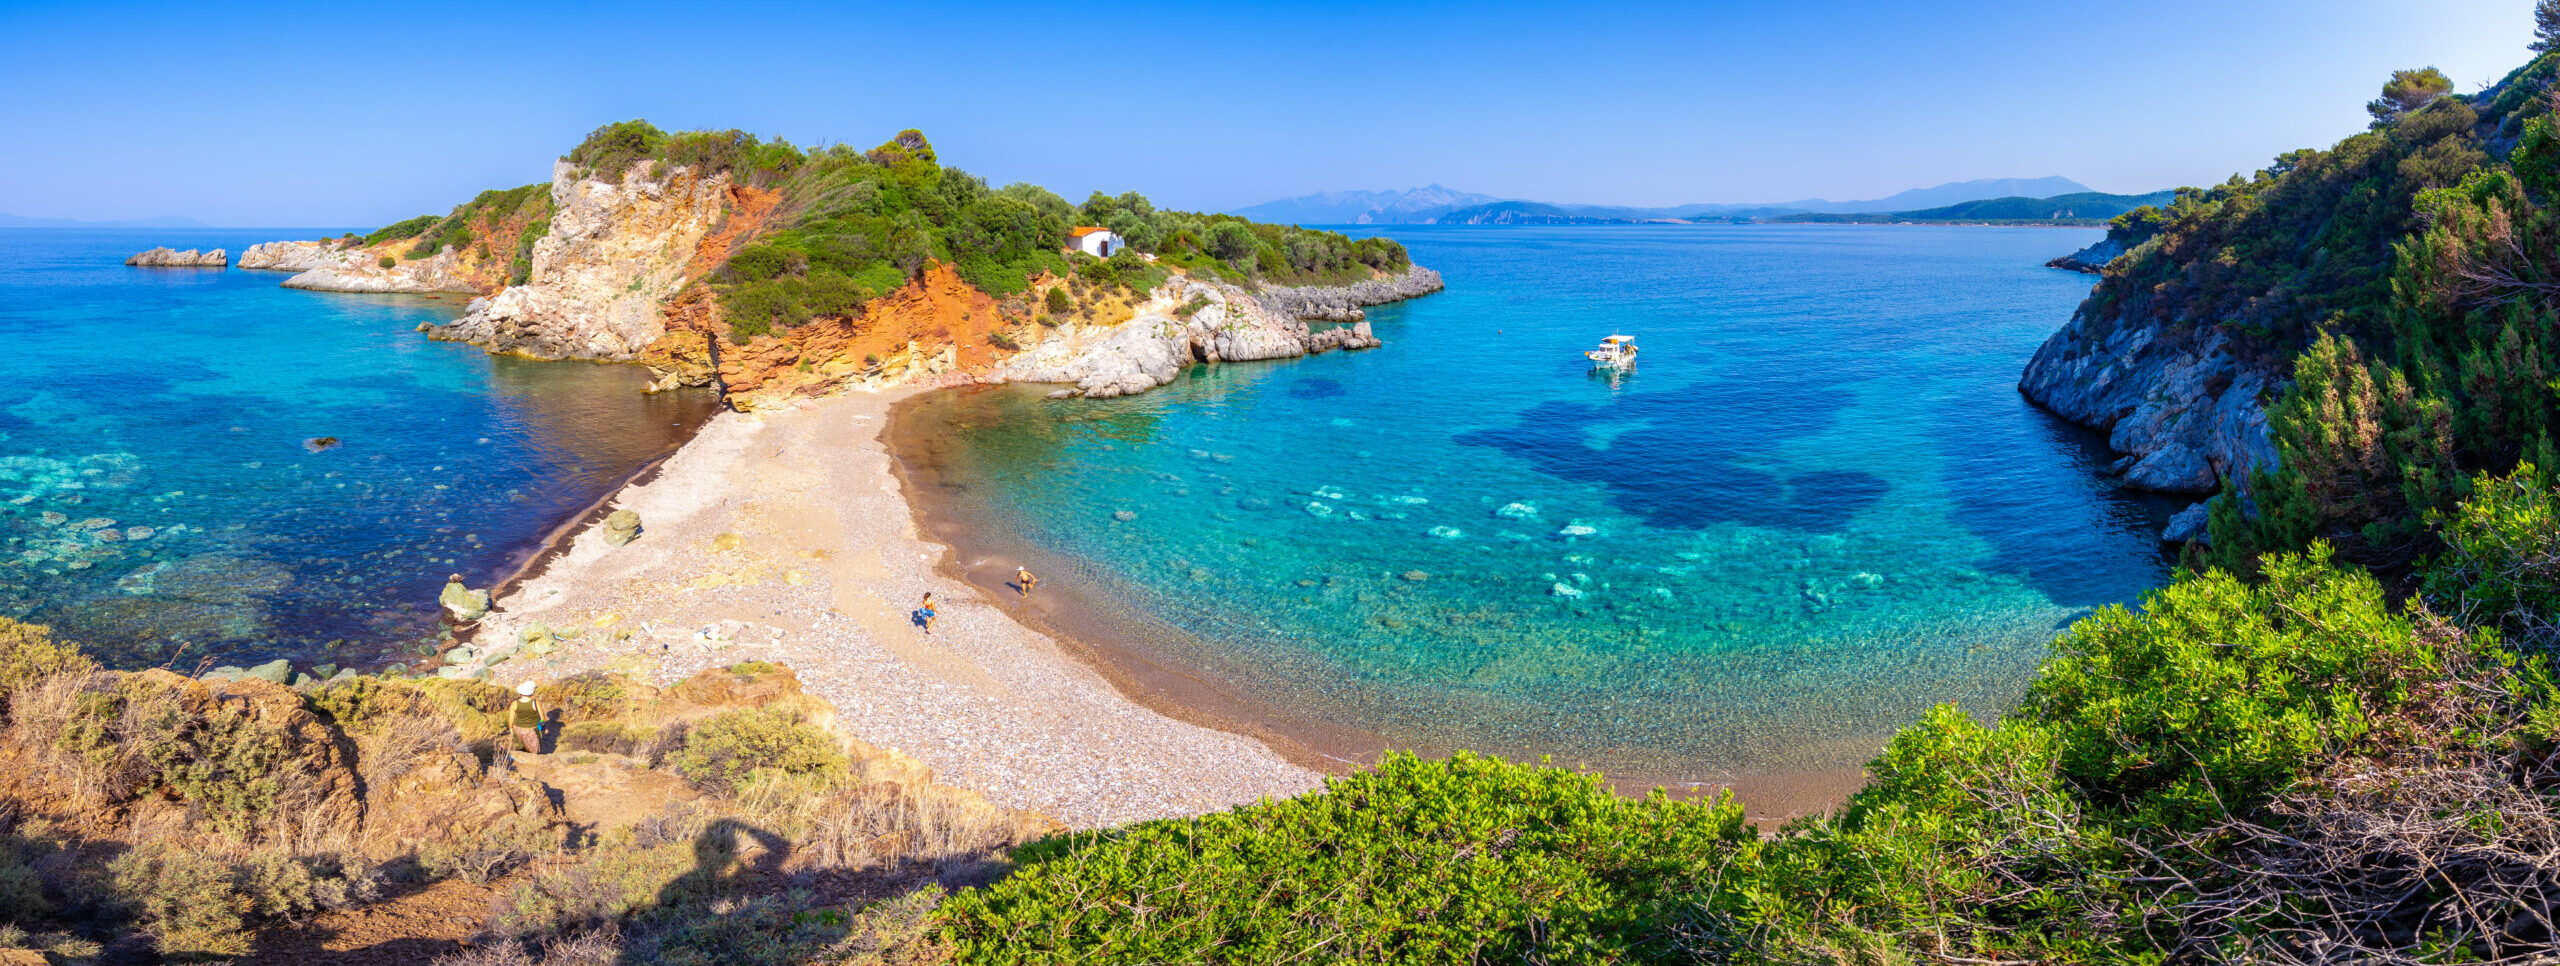 The twin beach of lovers in Evia